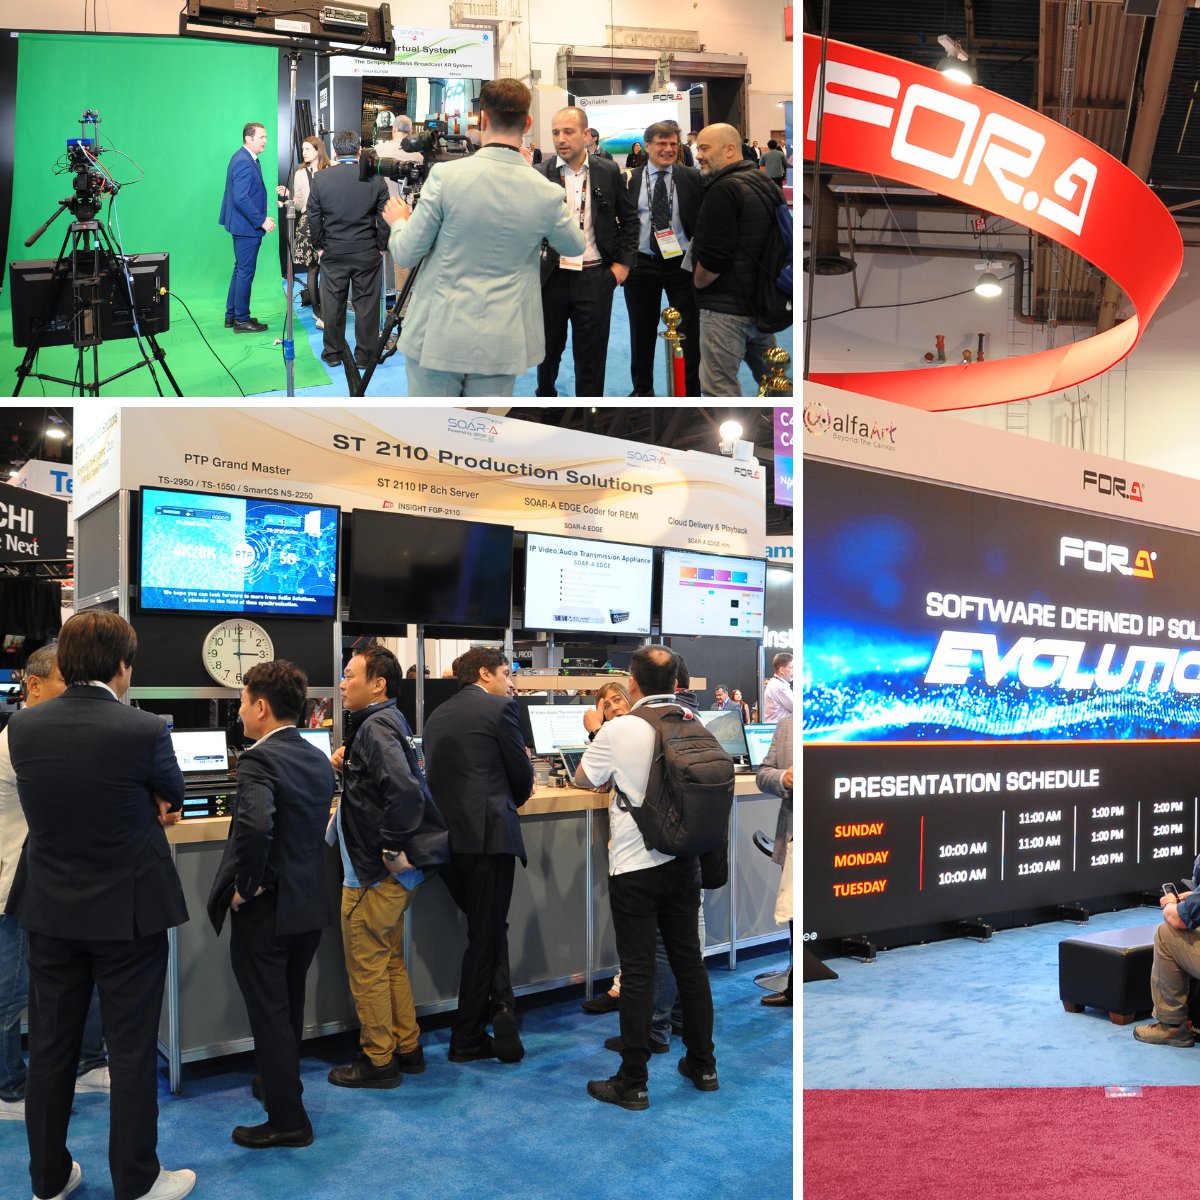 Another busy day here at #NABShow. We’re looking forward to an exciting final day tomorrow. Come and see us at booth C4507 for one last day of live demos and exciting discussions. #XR #SoftwareDefinedIPSolutions #BroadcastAutomation @Alfalite @ClassXdev @SipRadius @NABShow